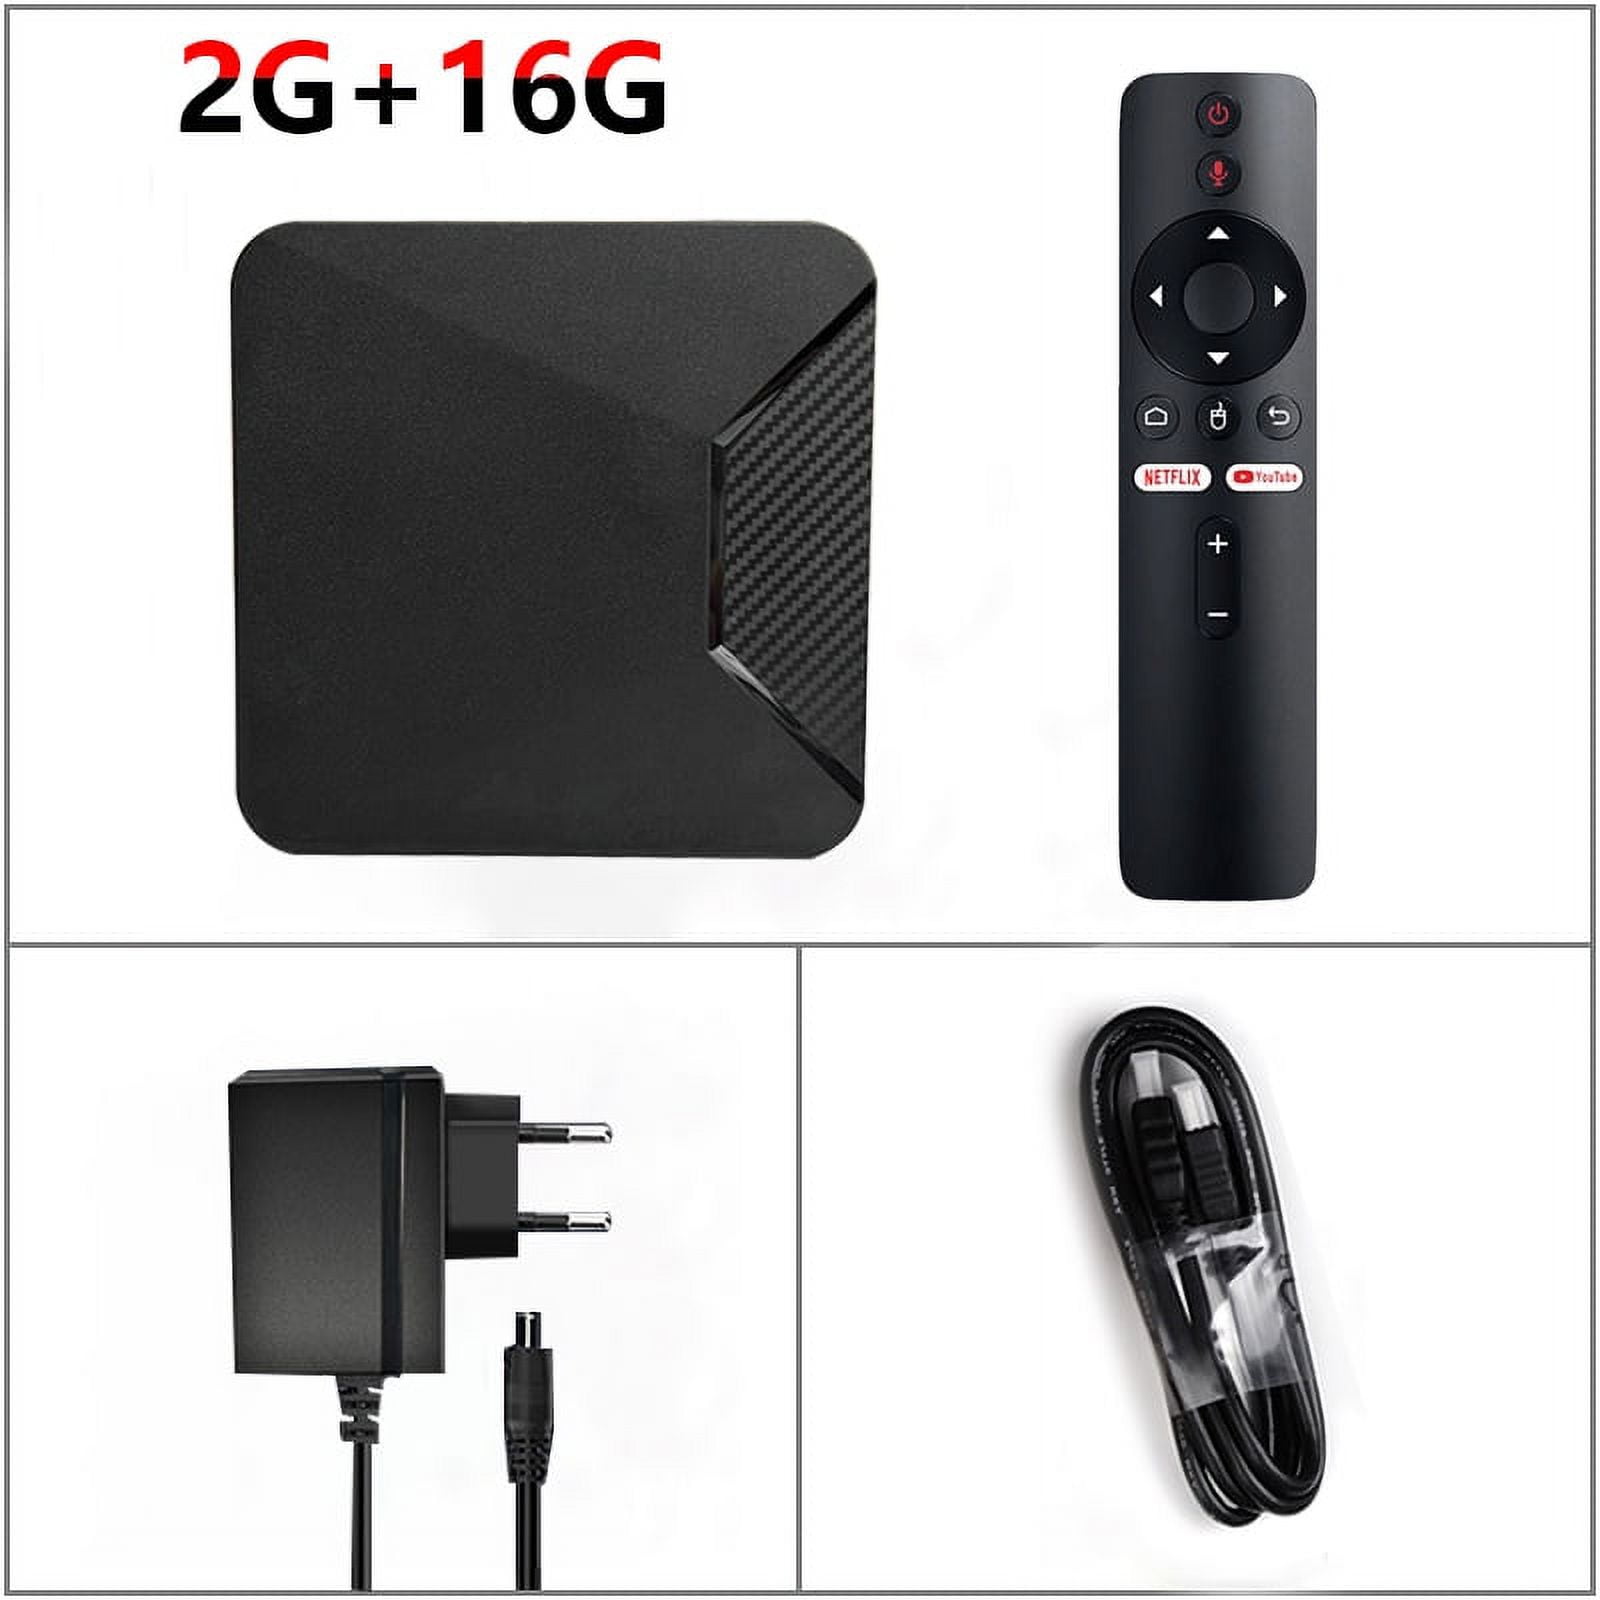 Android TV Box 4k - Q5 2/8GB Voice Control, Bluetooth, Wifi & 700+ Channel